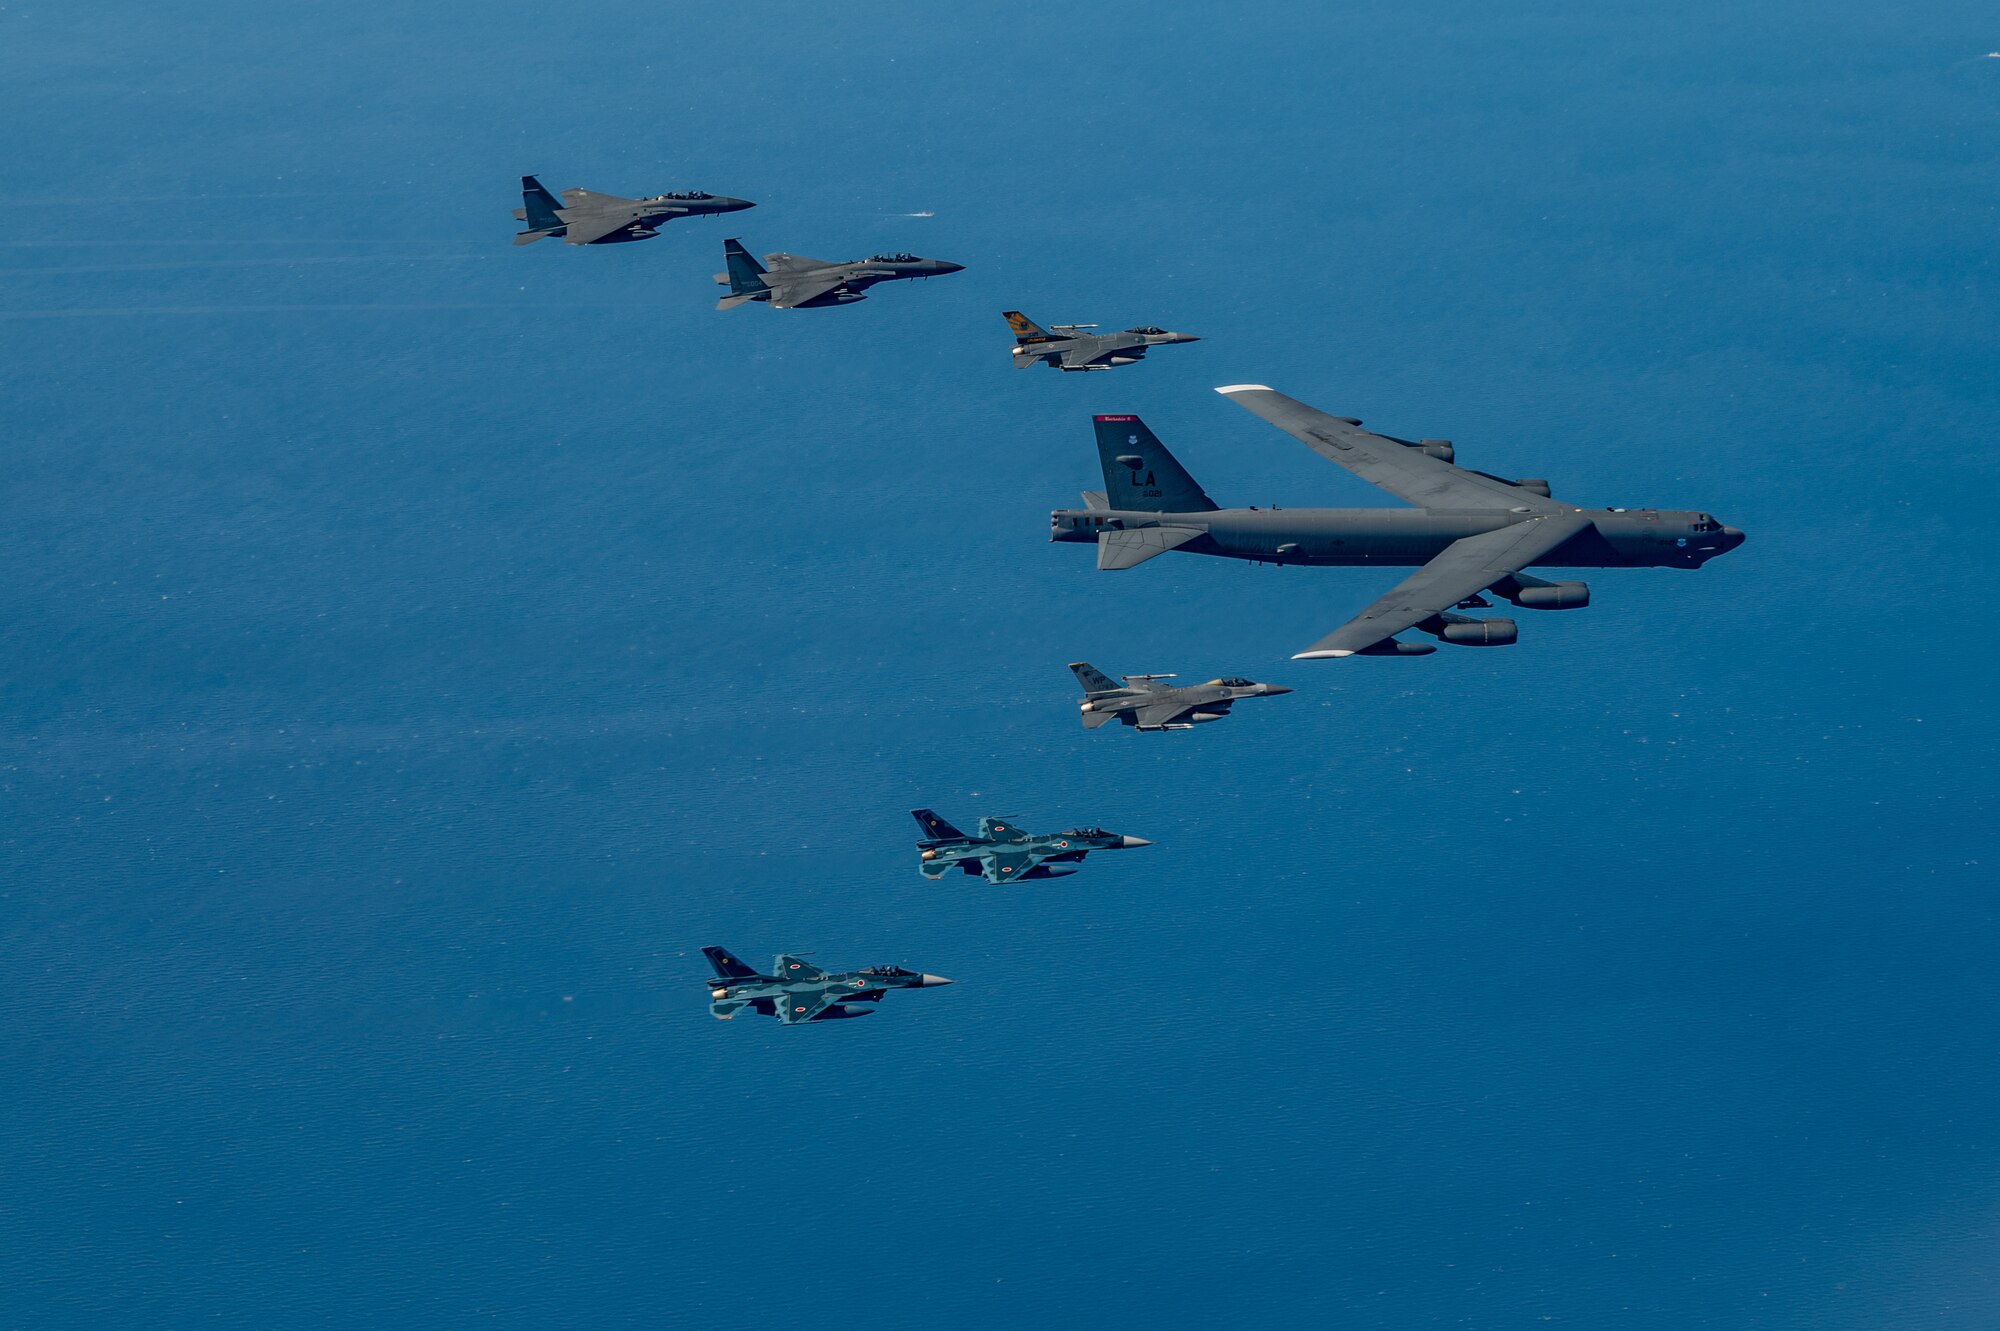 Fighter aircraft from the U.S., Japan, and the Republic of Korea conducted a trilateral escort flight of a U.S. B-52H Stratofortress Bomber operating in the Indo-Pacific, 22 Oct, 2023. U.S. F-16s from the 80th Fighter Squadron, 8th Fighter Wing flew alongside Japan Air Self-Defense Force (JASDF) F-2s from the 8th Air Wing, and Republic of Korea Air Force (ROKAF) F-15Ks from the 11th Wing. (U.S. Air Force photo by Senior Airman Karrla Parra)